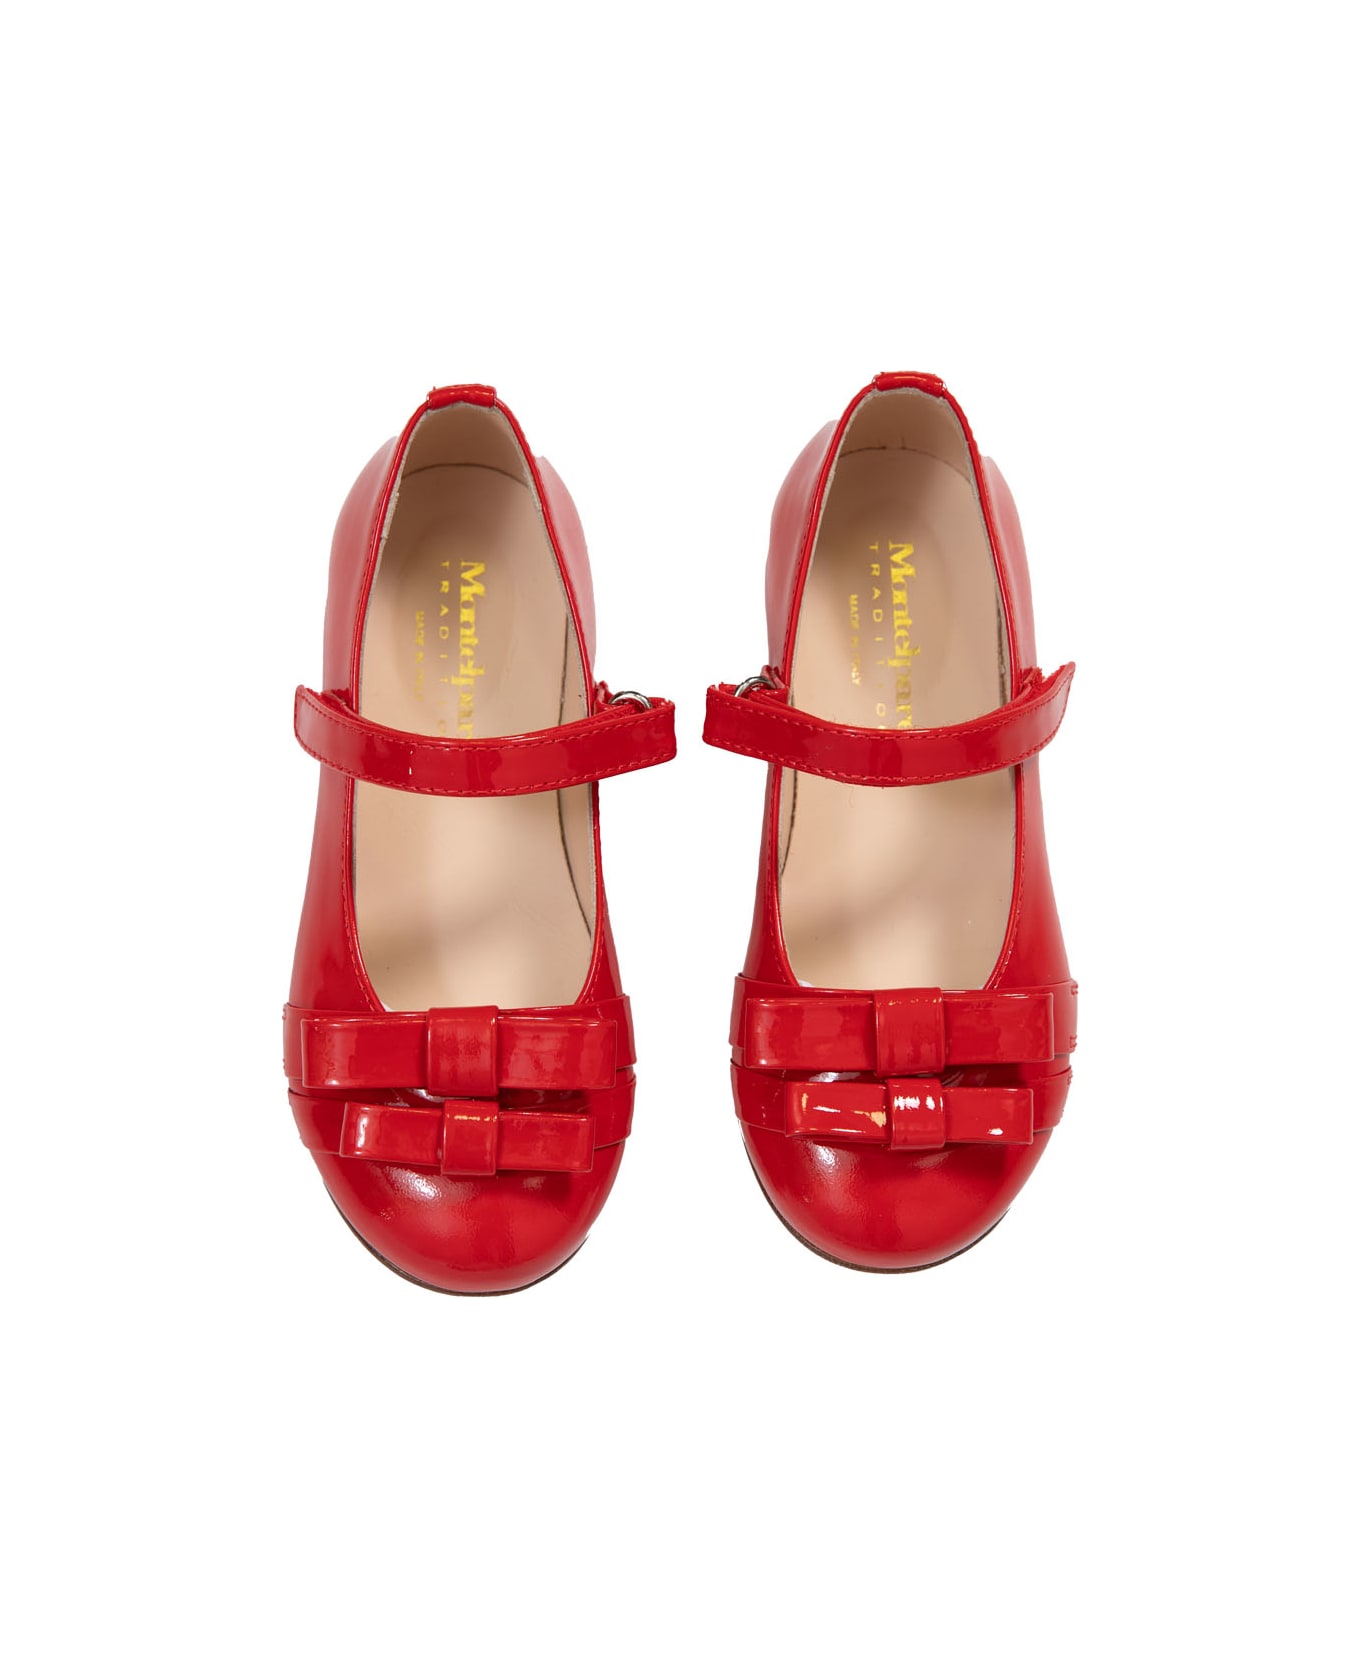 Andrea Montelpare Patent Leather Shoes - Red